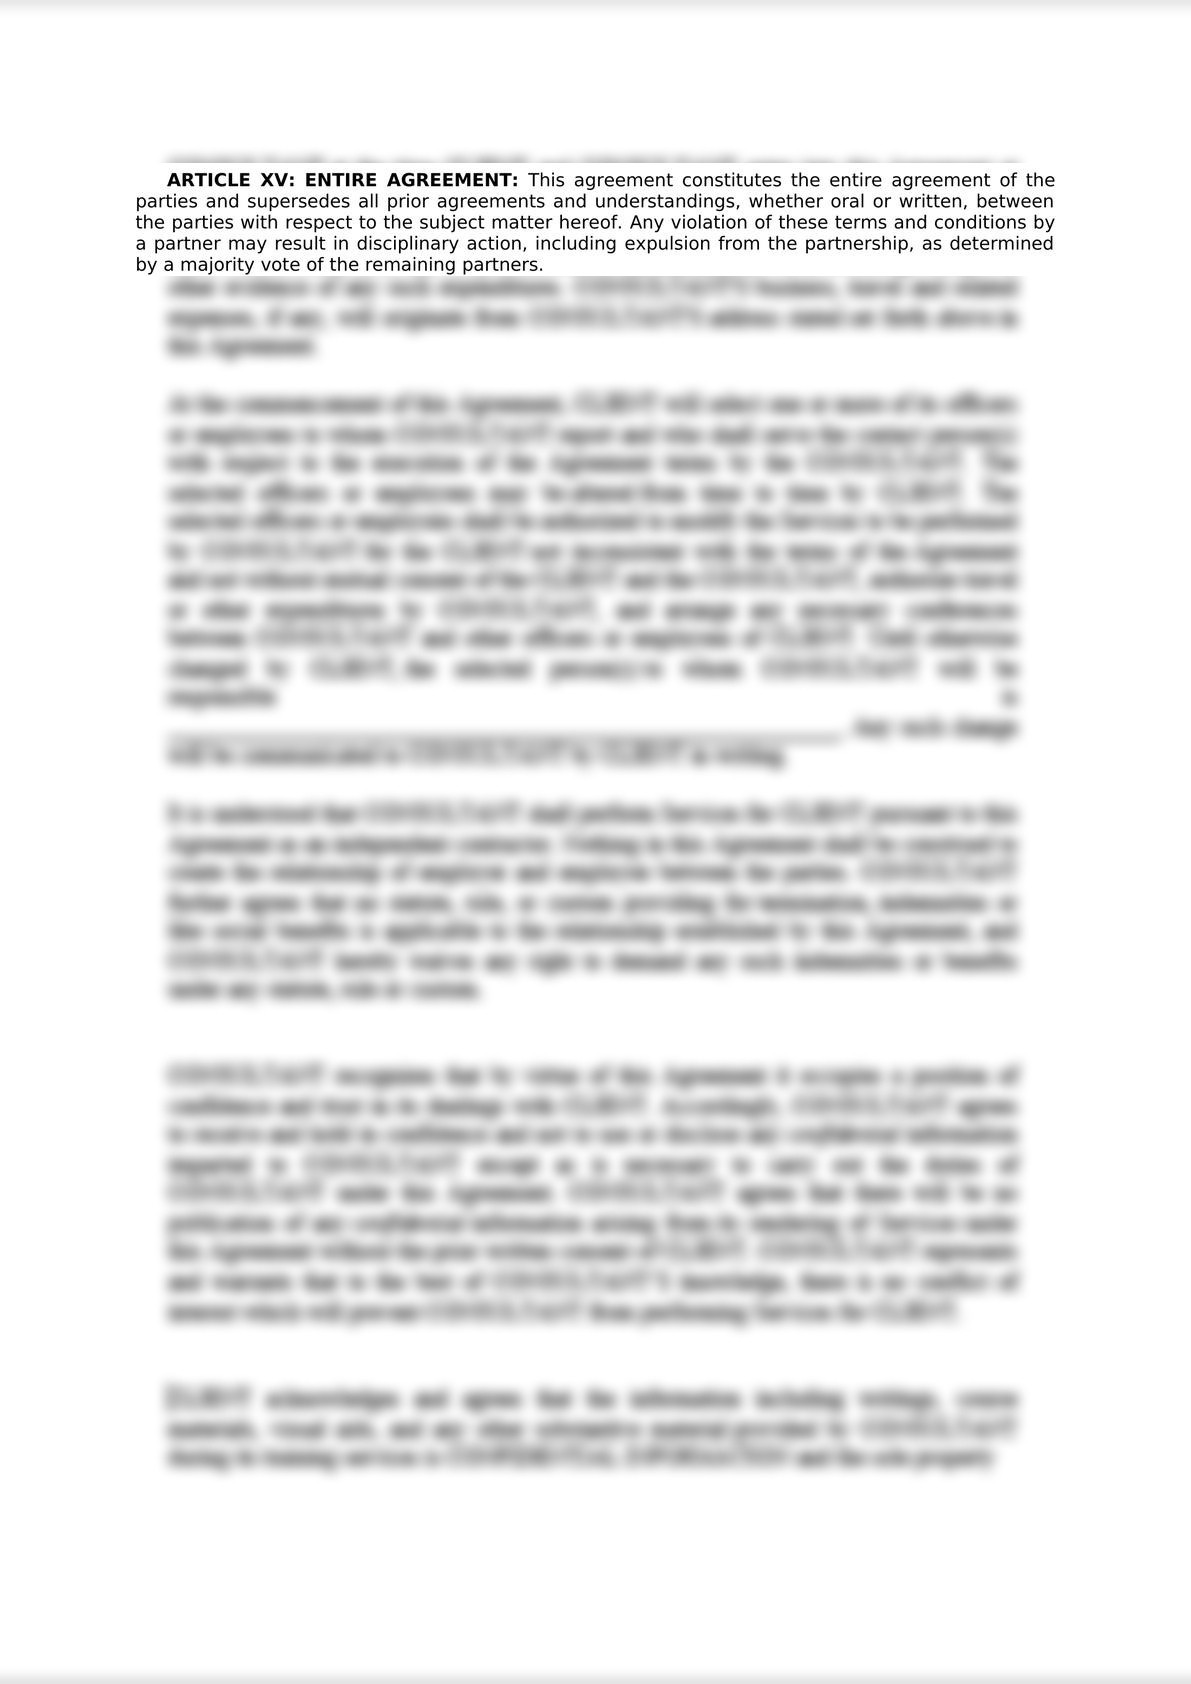 Articles of General Partnership (Agreement Contract)-3